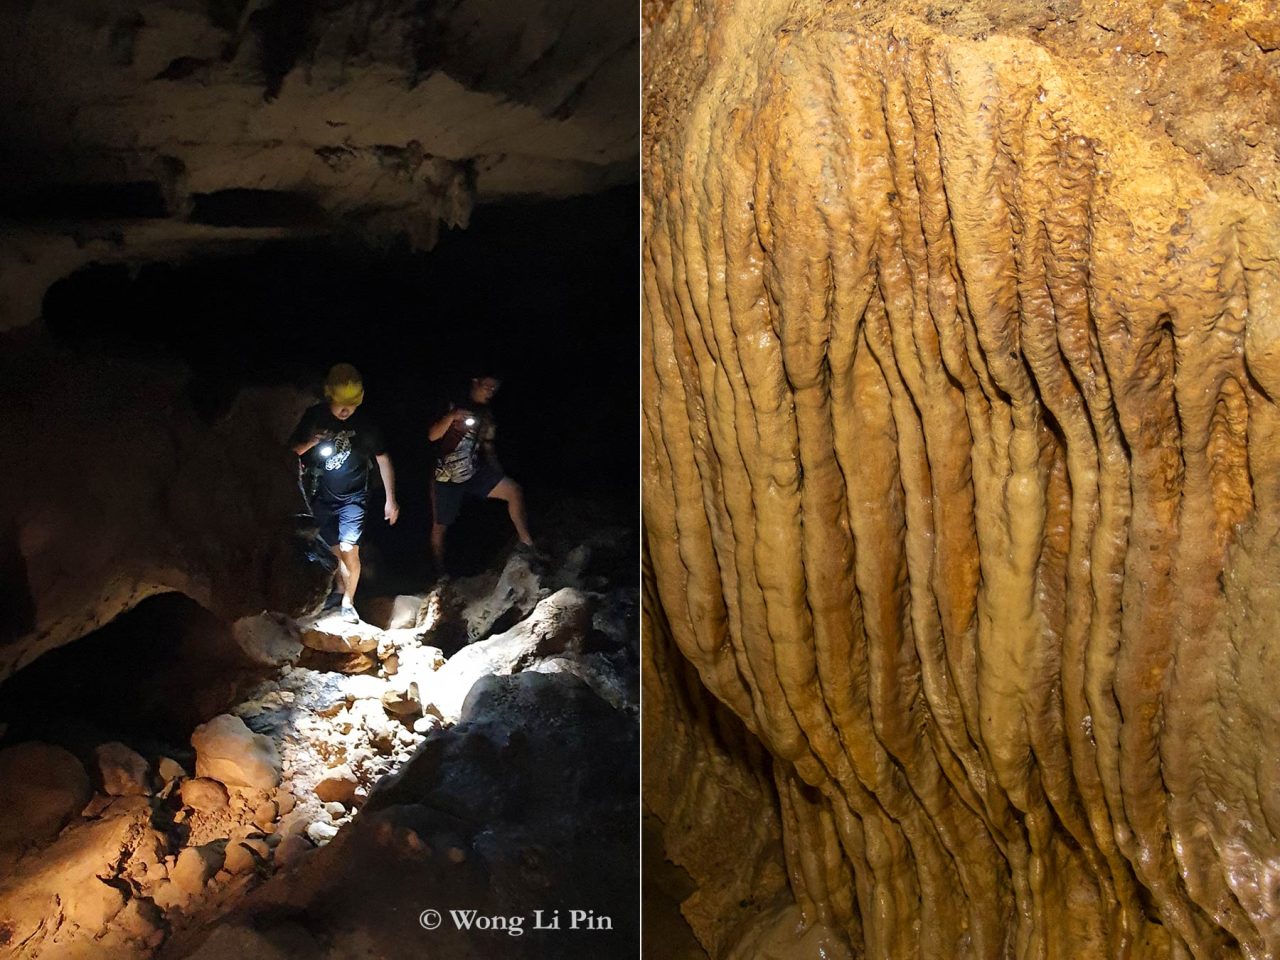 Left: exploring Pungiton Cave in the dark. Right: Flowstones, sheets of calcium carbonate on the cave walls